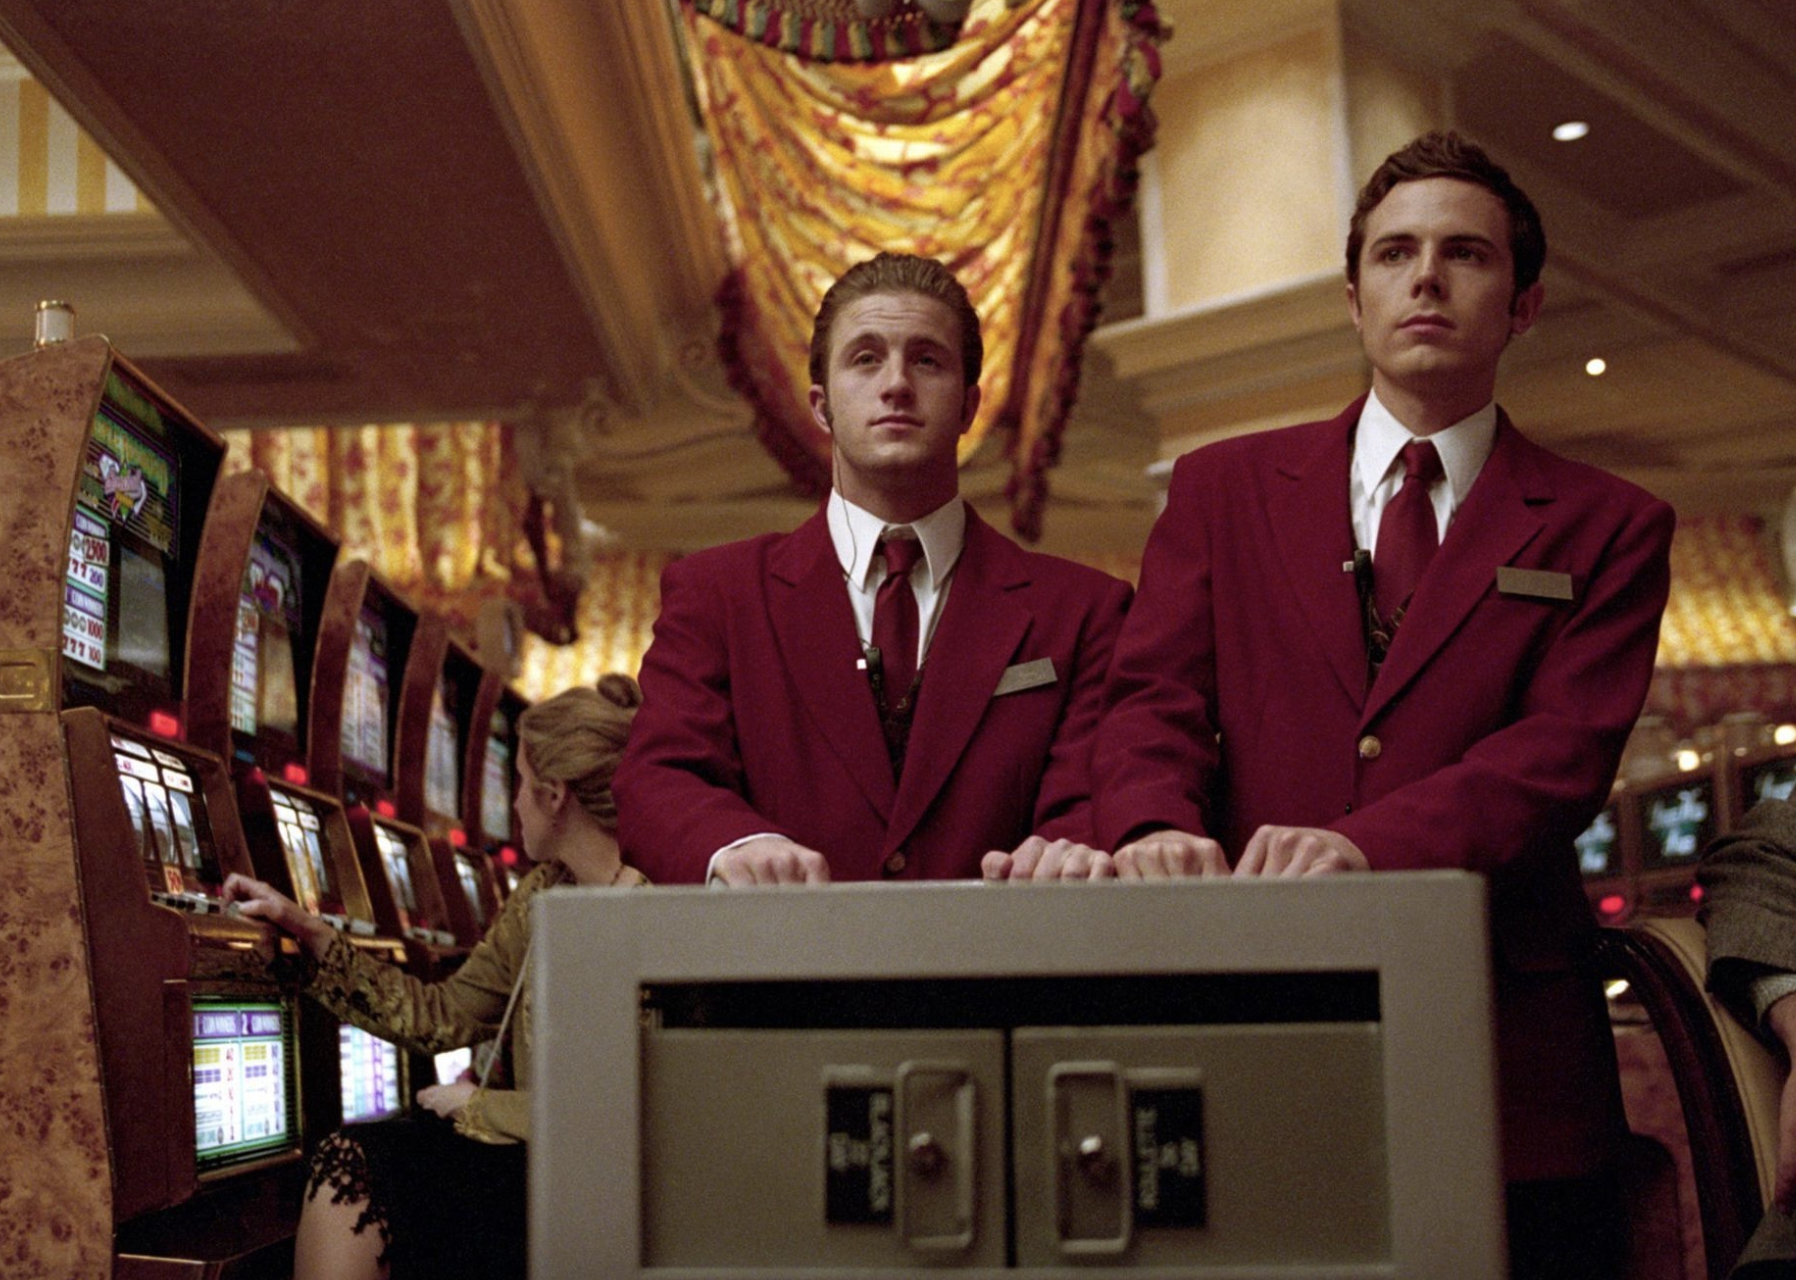 Casey Affleck and Scott Caan in a scene from "Ocean's Eleven"